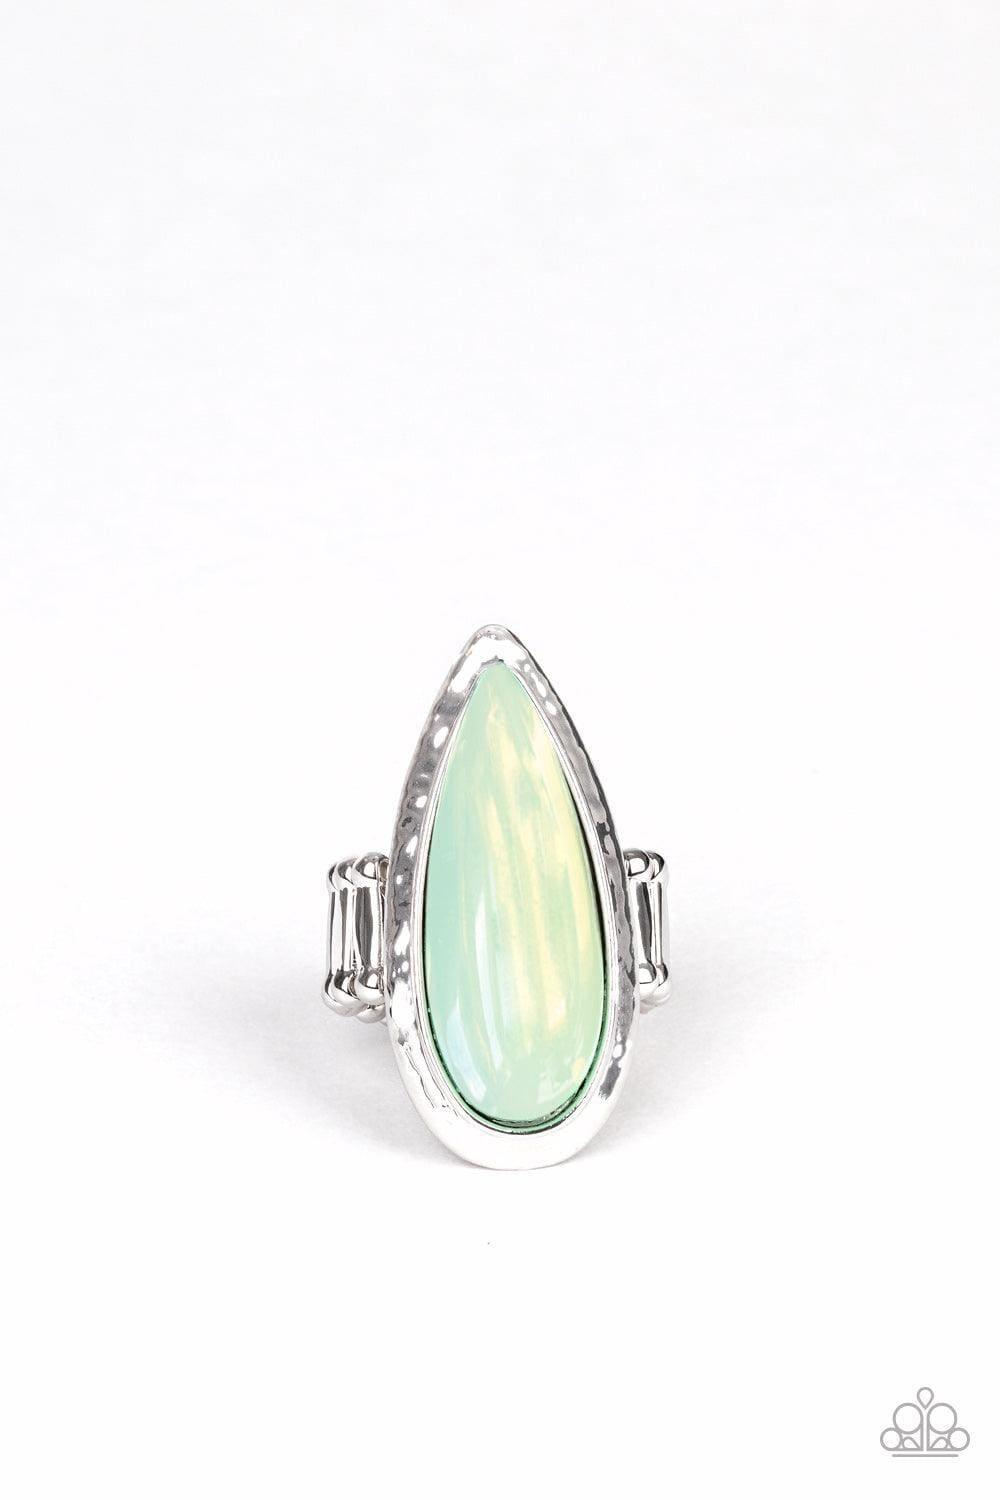 Paparazzi Accessories - Opal Oasis - Green Ring - Bling by JessieK